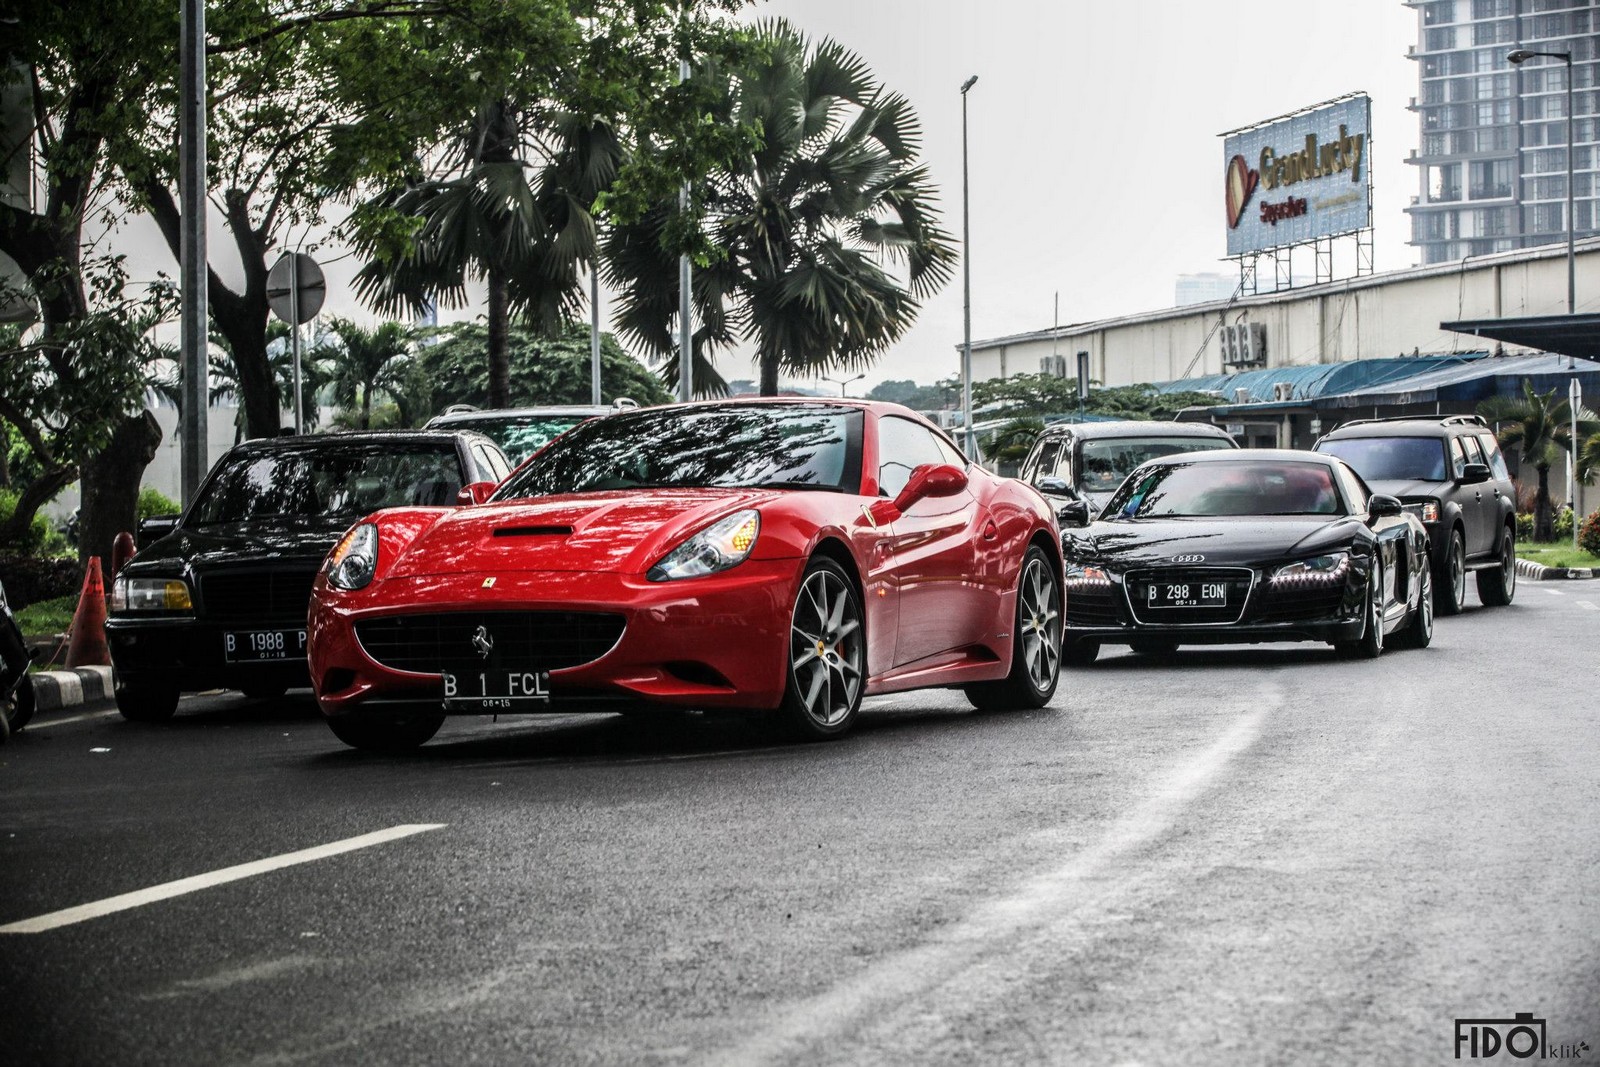 Gallery: Supercar Club of Indonesia Goes to Kamang Part 2 - GTspirit